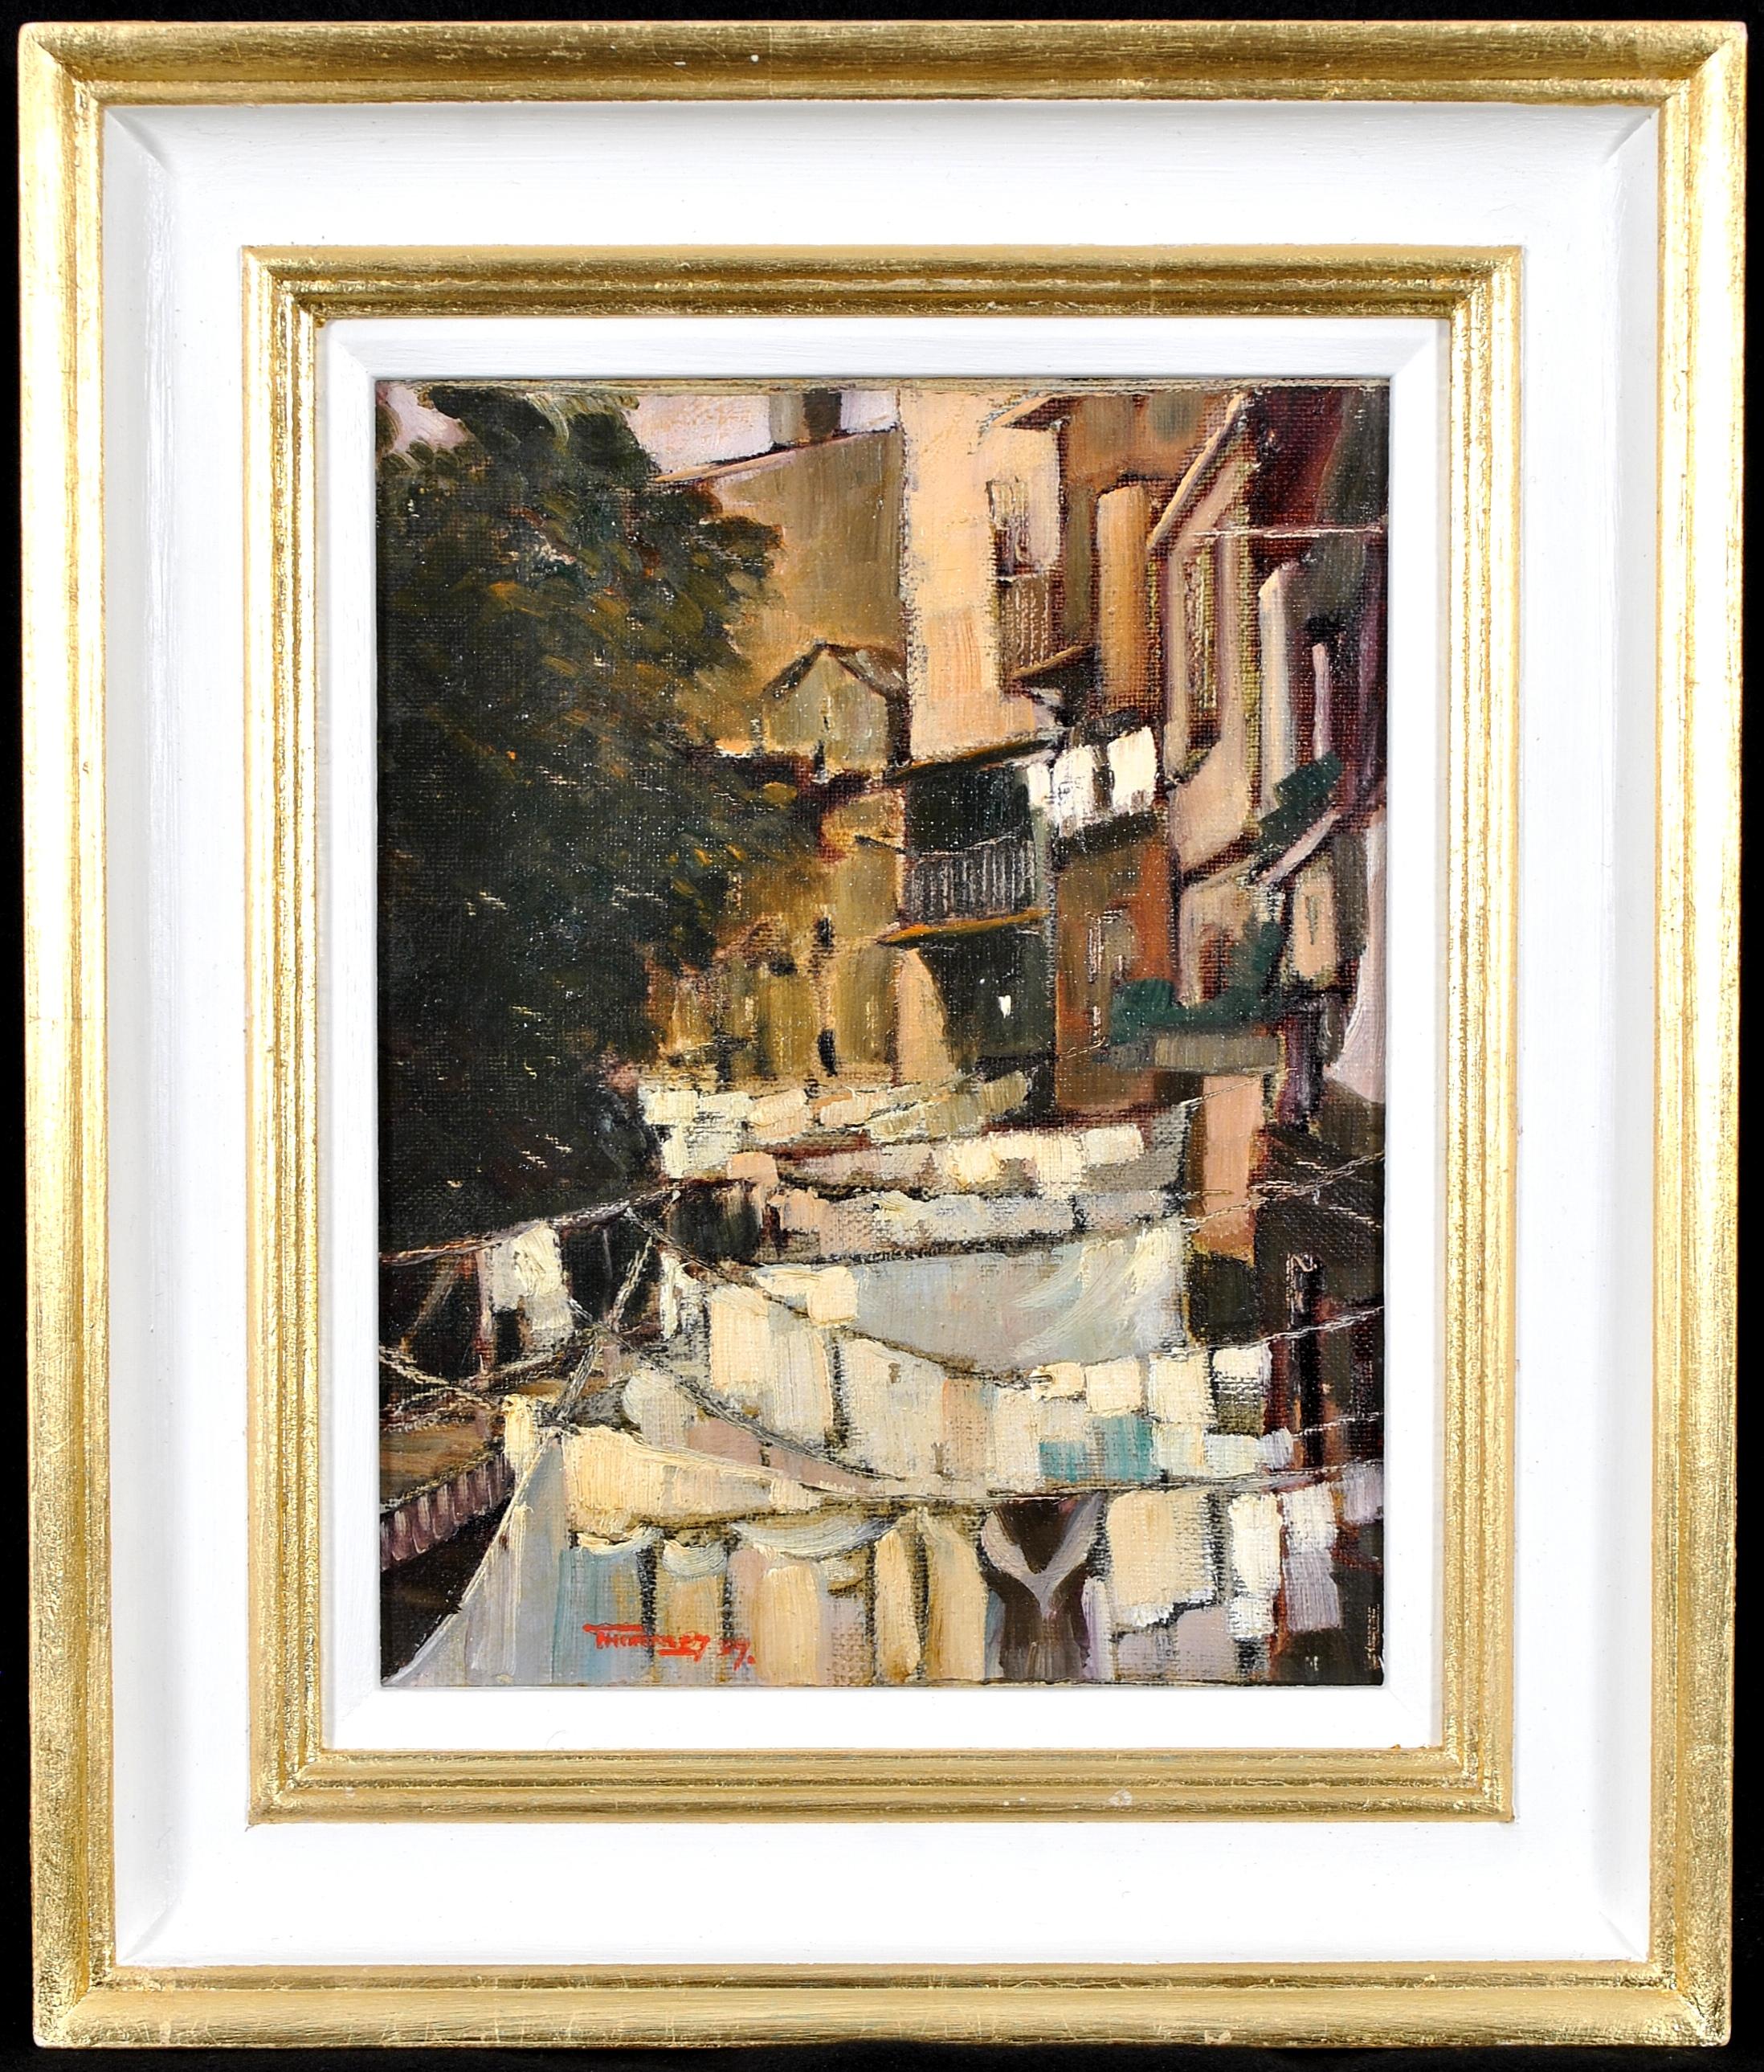 Villefranche - Washing on the Lines French Riviera South of France Oil Painting